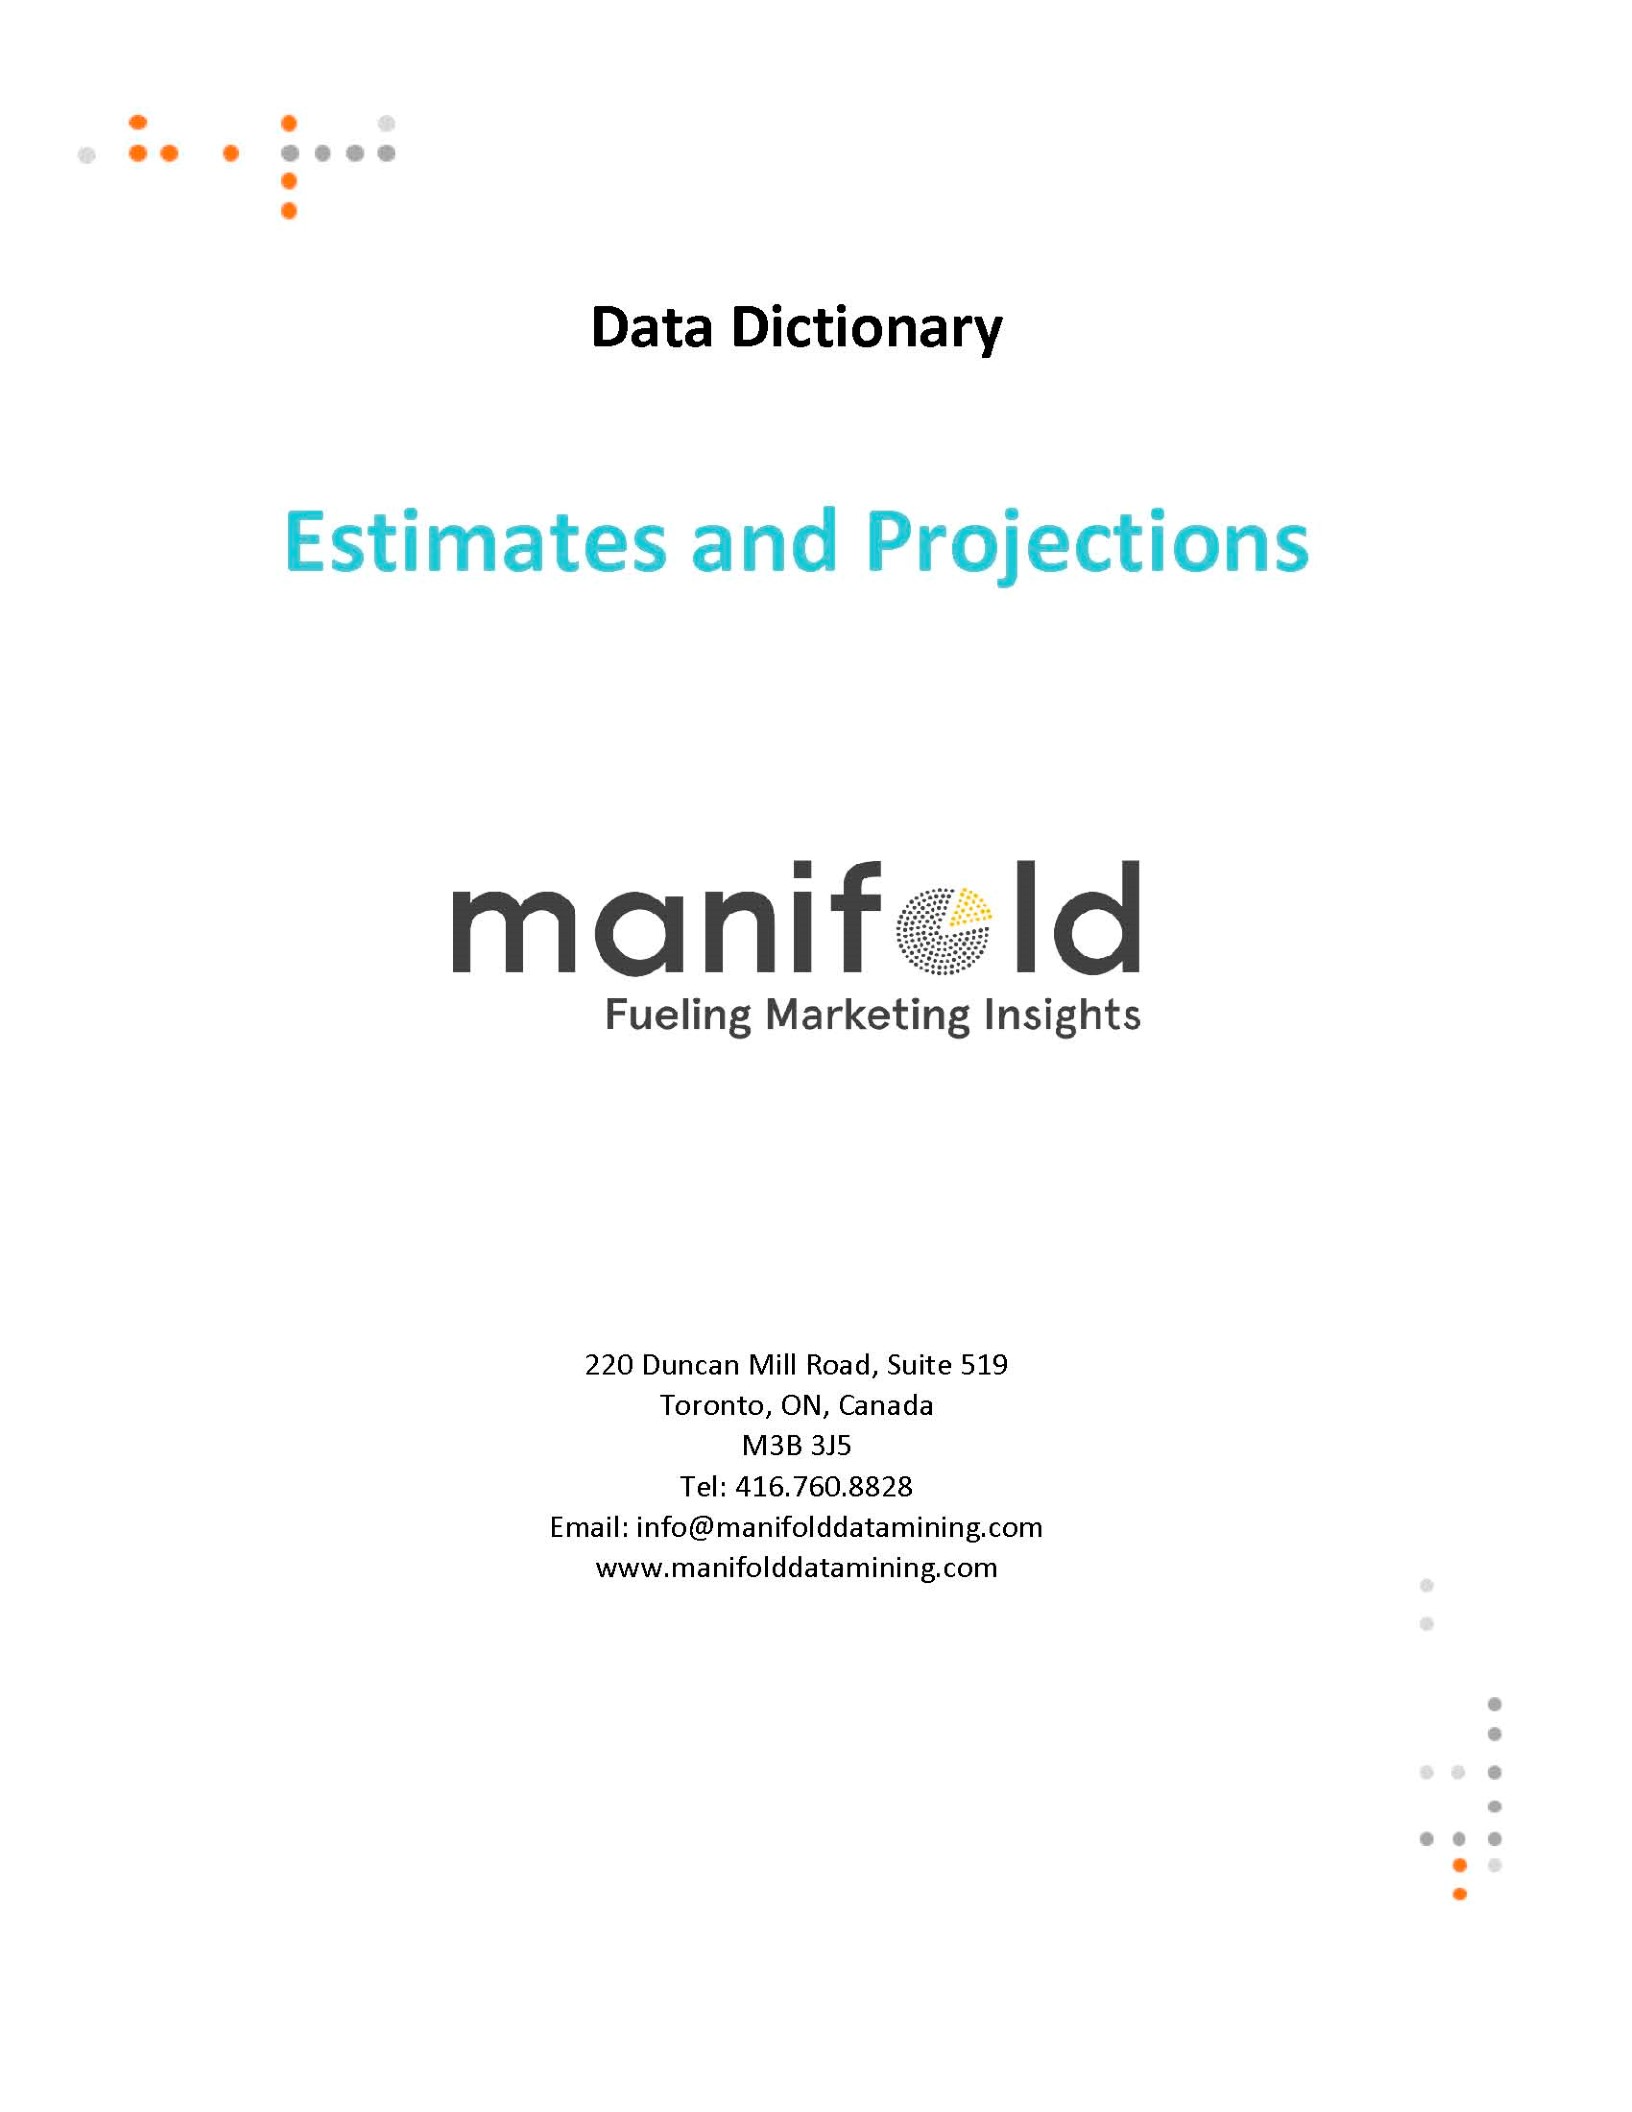 Data Dictionary Estimates and Projections_Page_1